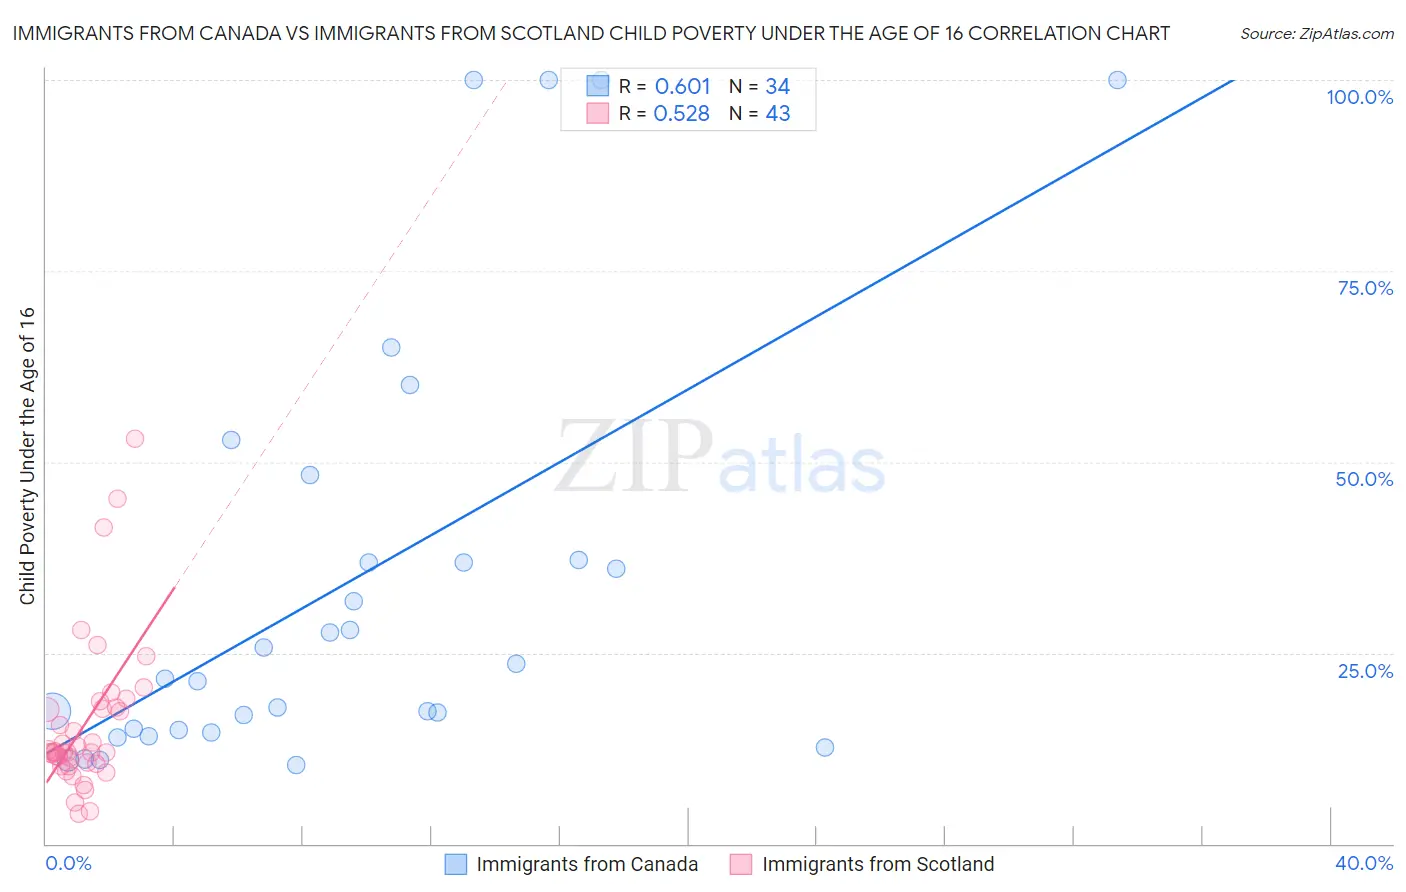 Immigrants from Canada vs Immigrants from Scotland Child Poverty Under the Age of 16